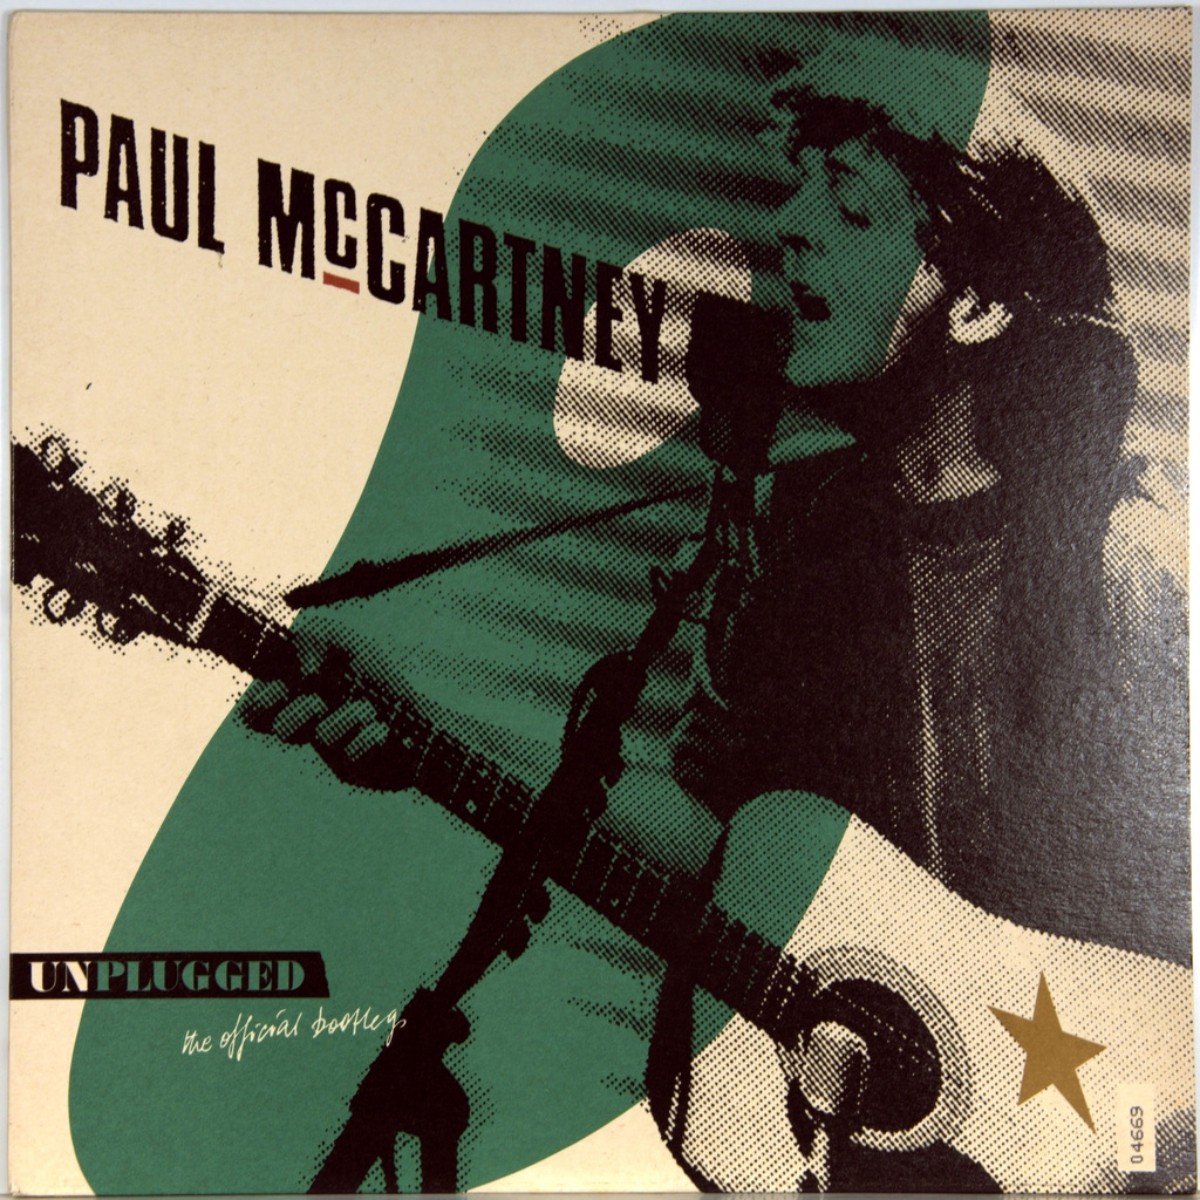 Album Unplugged (The Official Bootleg) by Paul McCartney